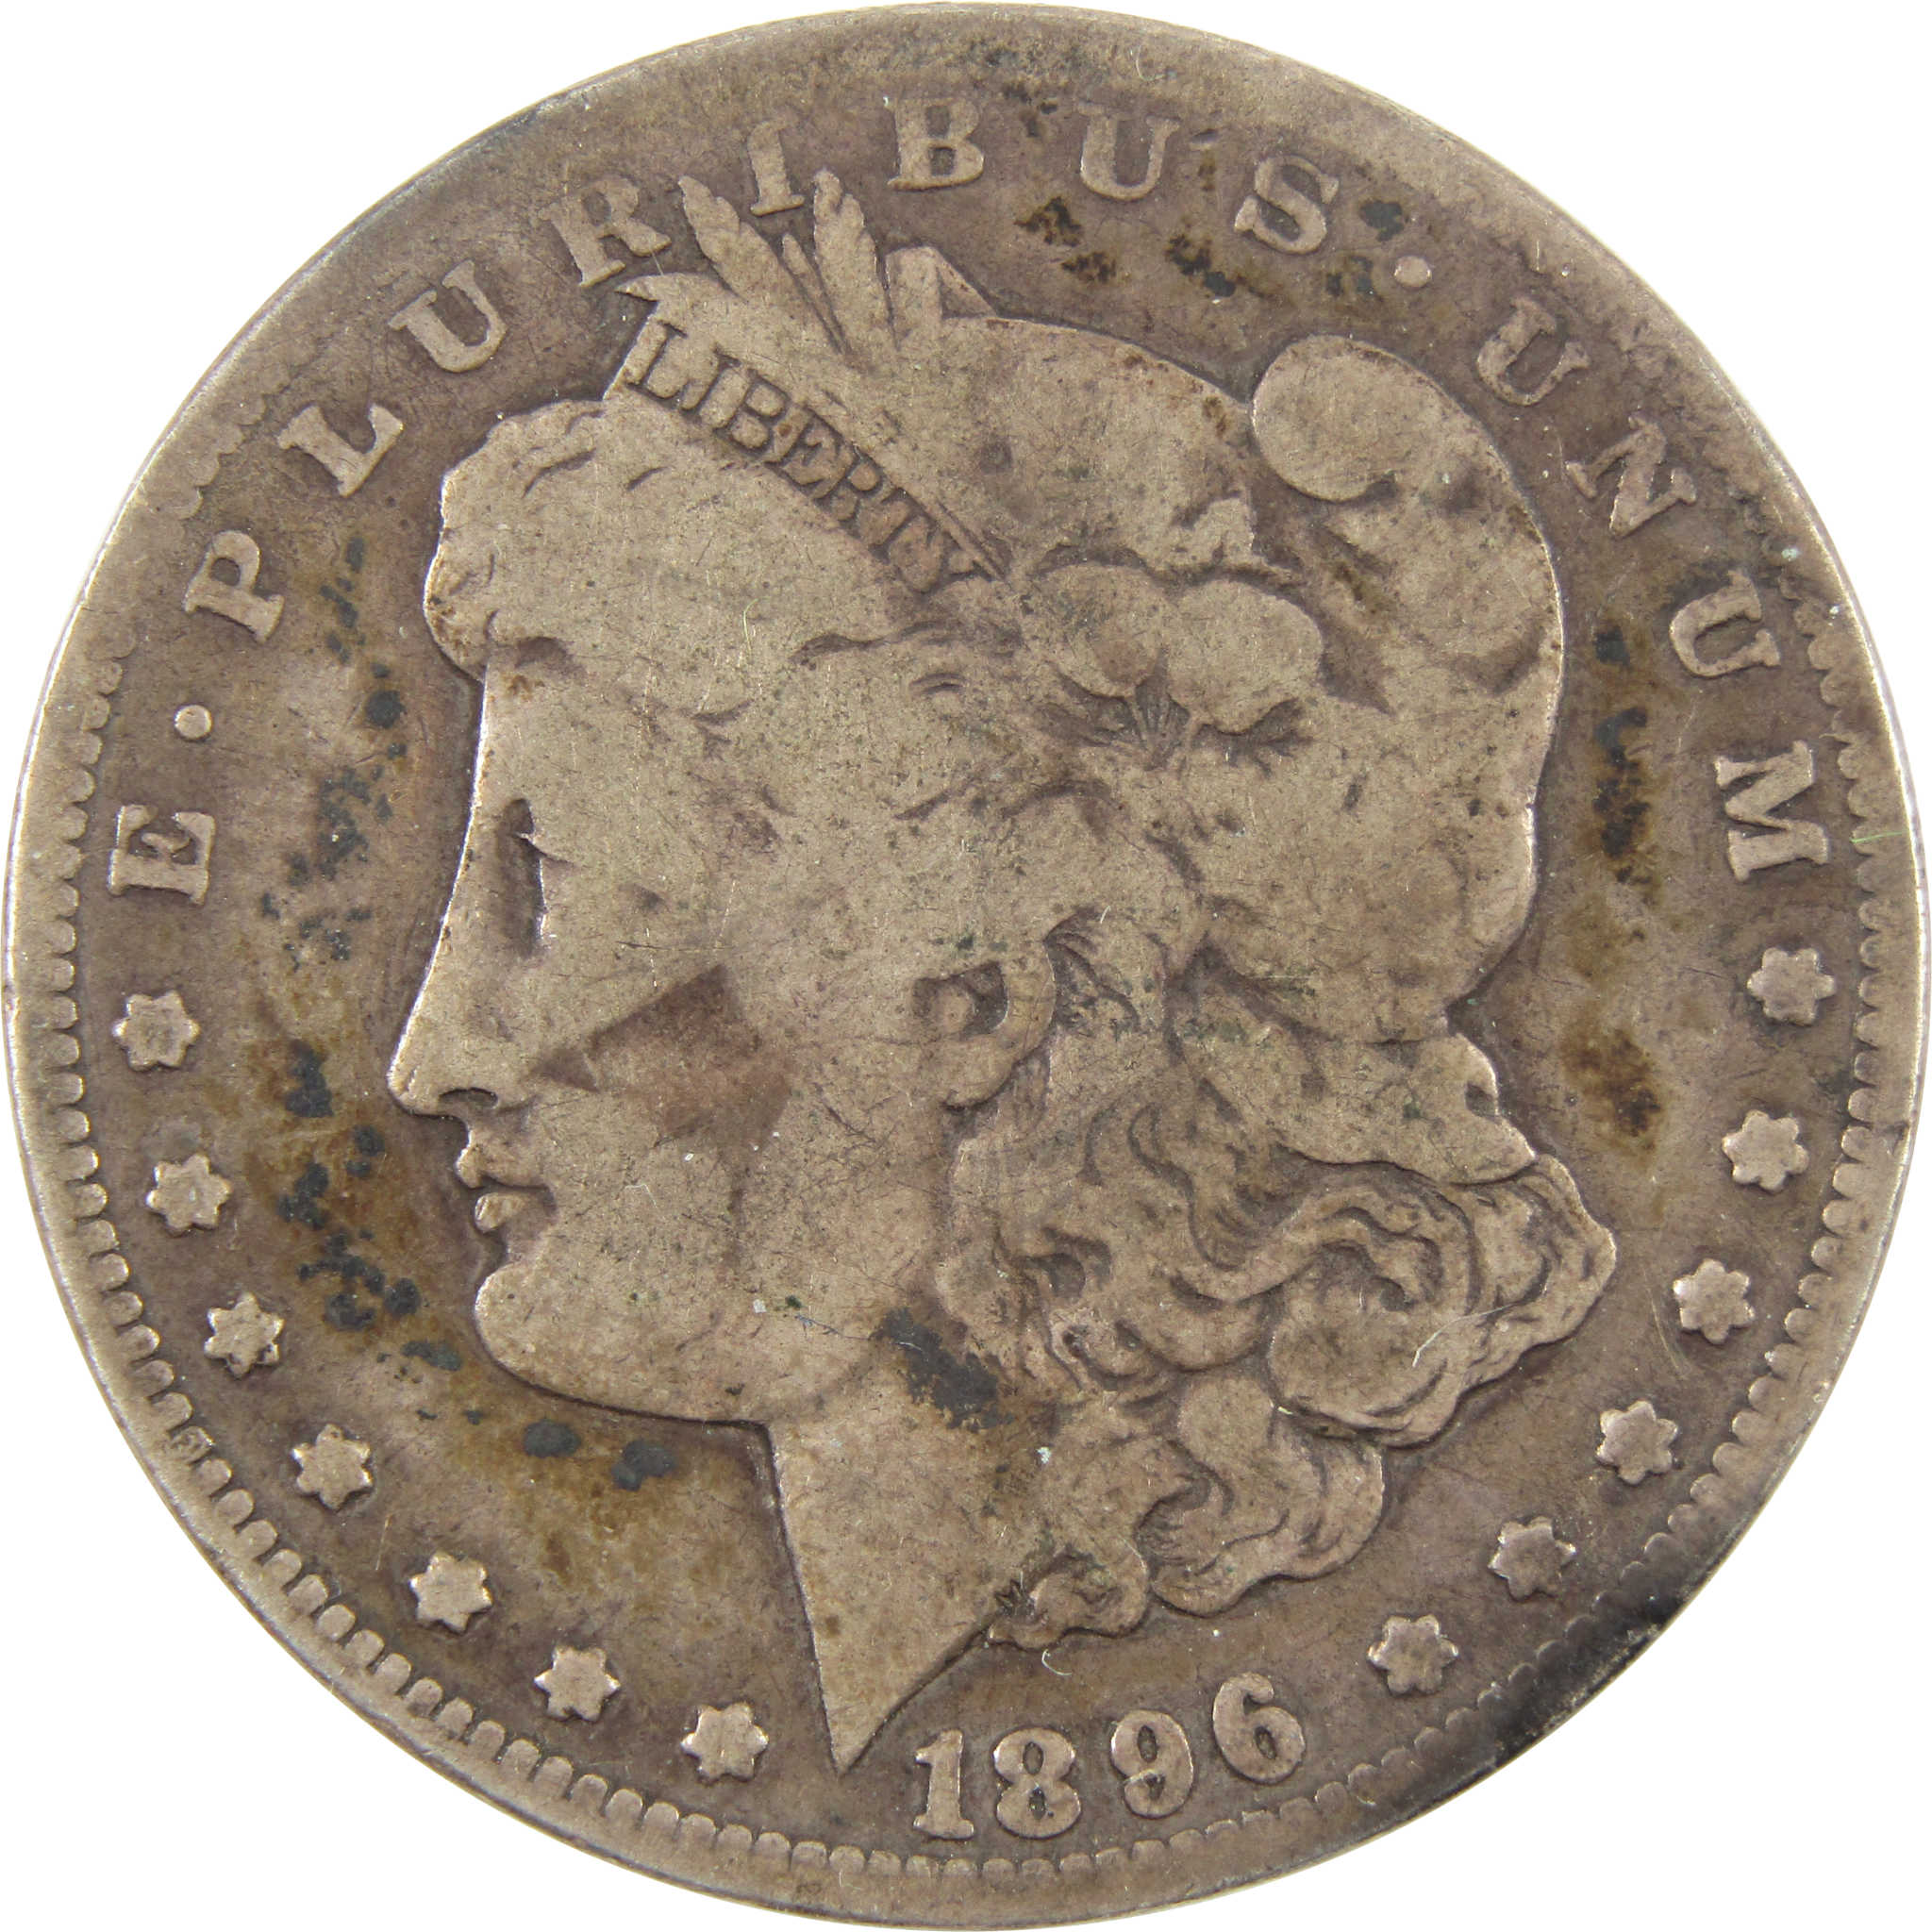 1896 S Morgan Dollar VG Very Good Details 90% Silver $1 SKU:I10430 - Morgan coin - Morgan silver dollar - Morgan silver dollar for sale - Profile Coins &amp; Collectibles